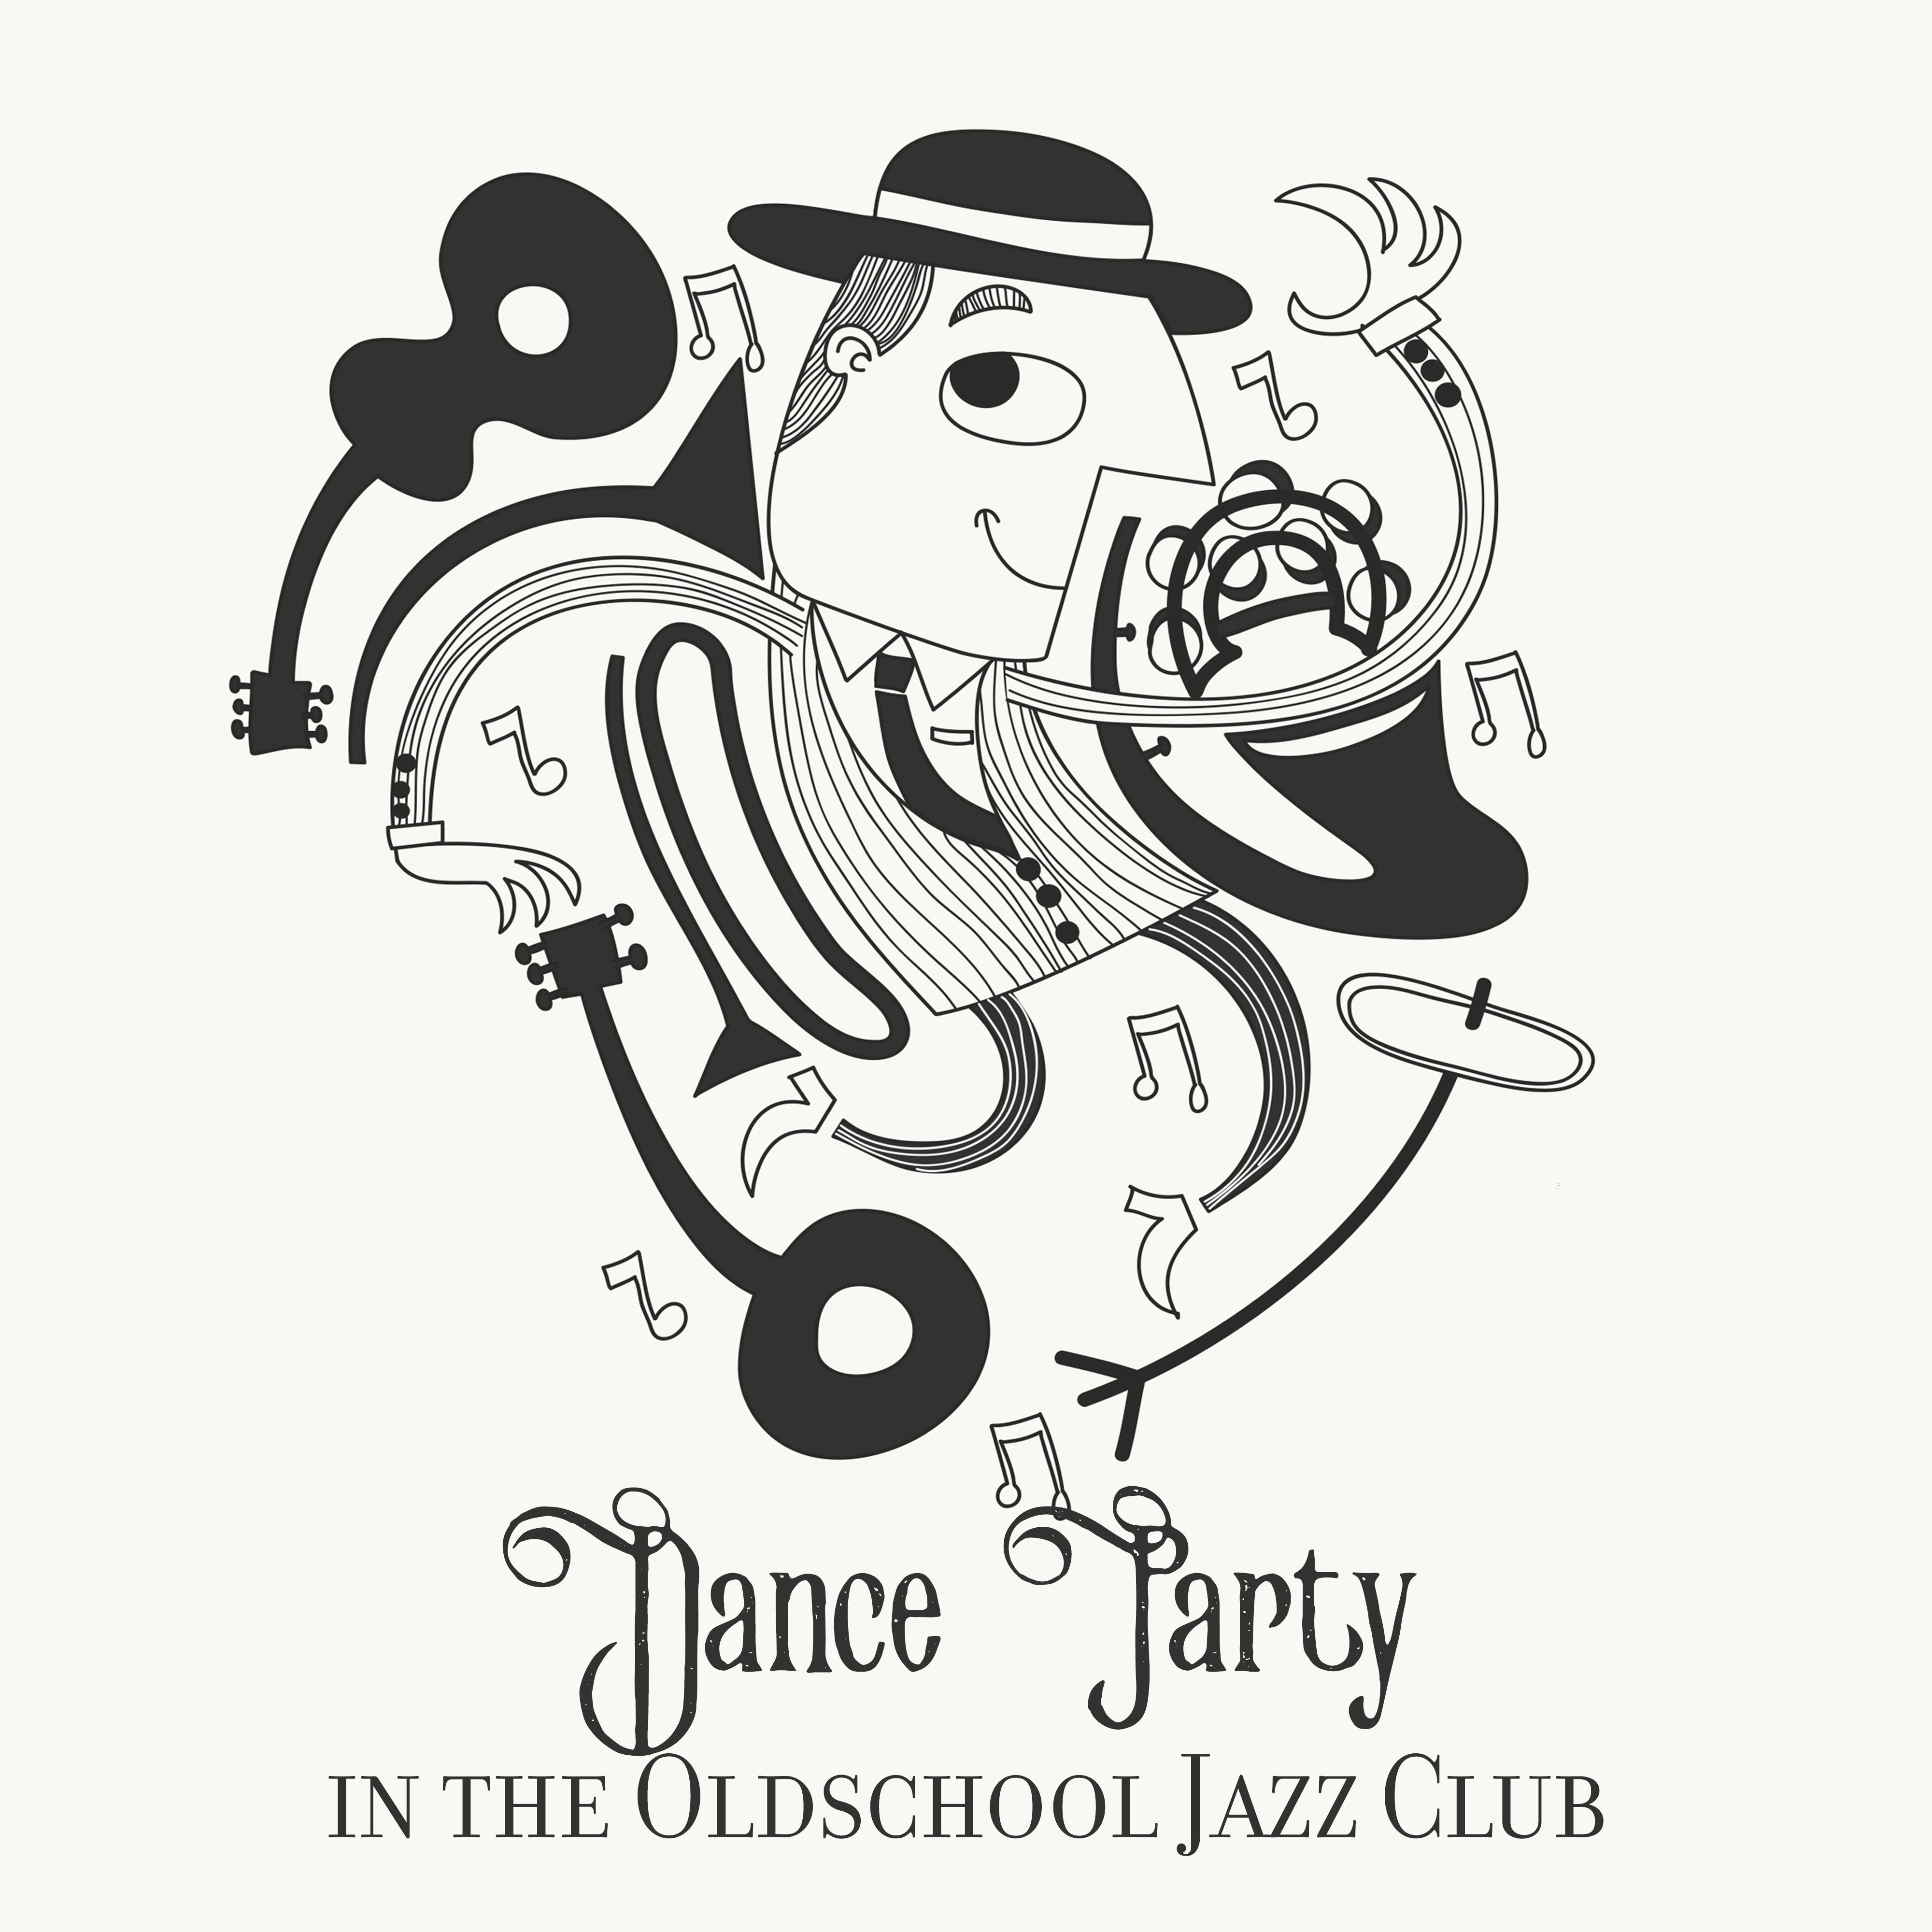 Dance Party in the Oldschool Jazz Club: 2019 Swing Jazz Music Selection for Vintage Styled Dance Party, Light & Happy Instrumental Melodies for Swing Dance